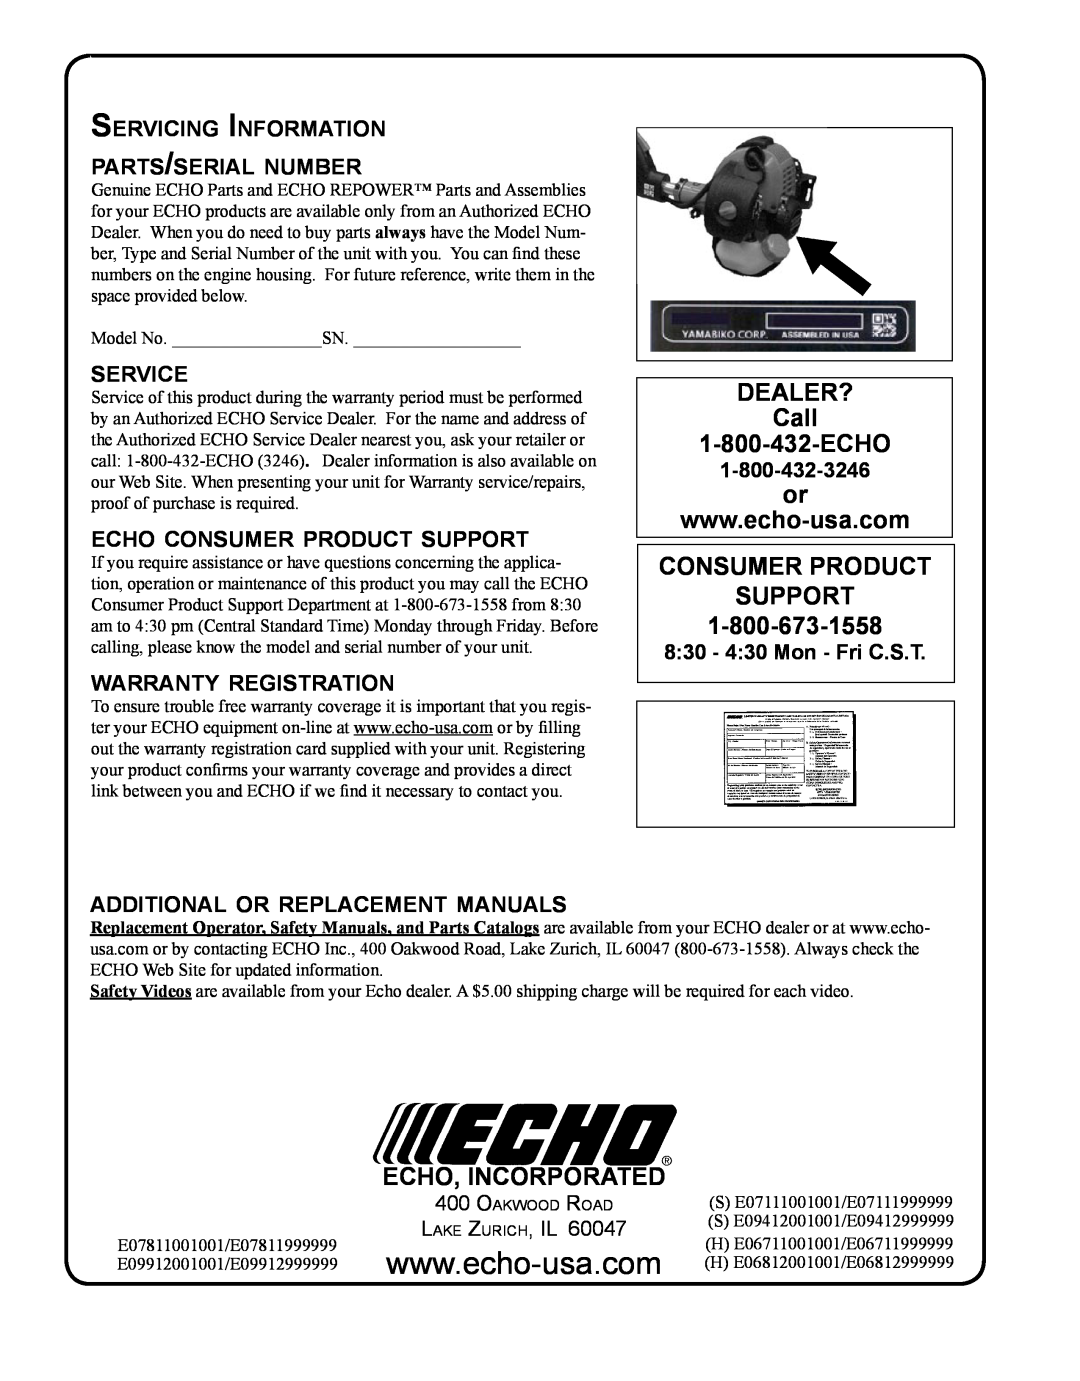 Echo PPT-265H DEALER? Call 1-800-432-ECHO, Consumer Product Support, Echo, Incorporated, service, warranty registration 